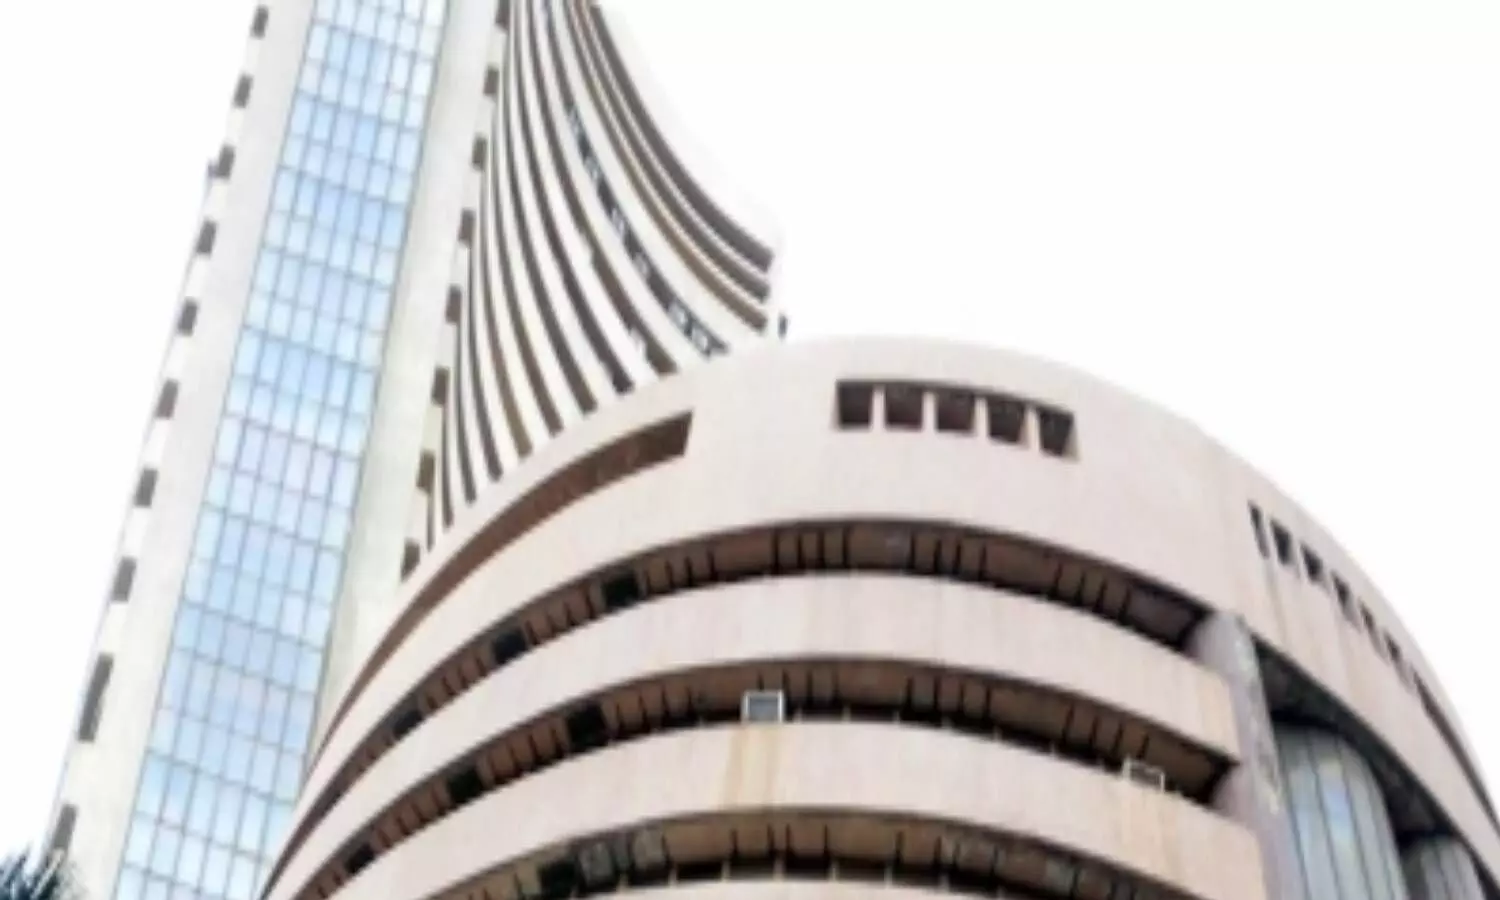 Auto, realty stocks lift equity indices